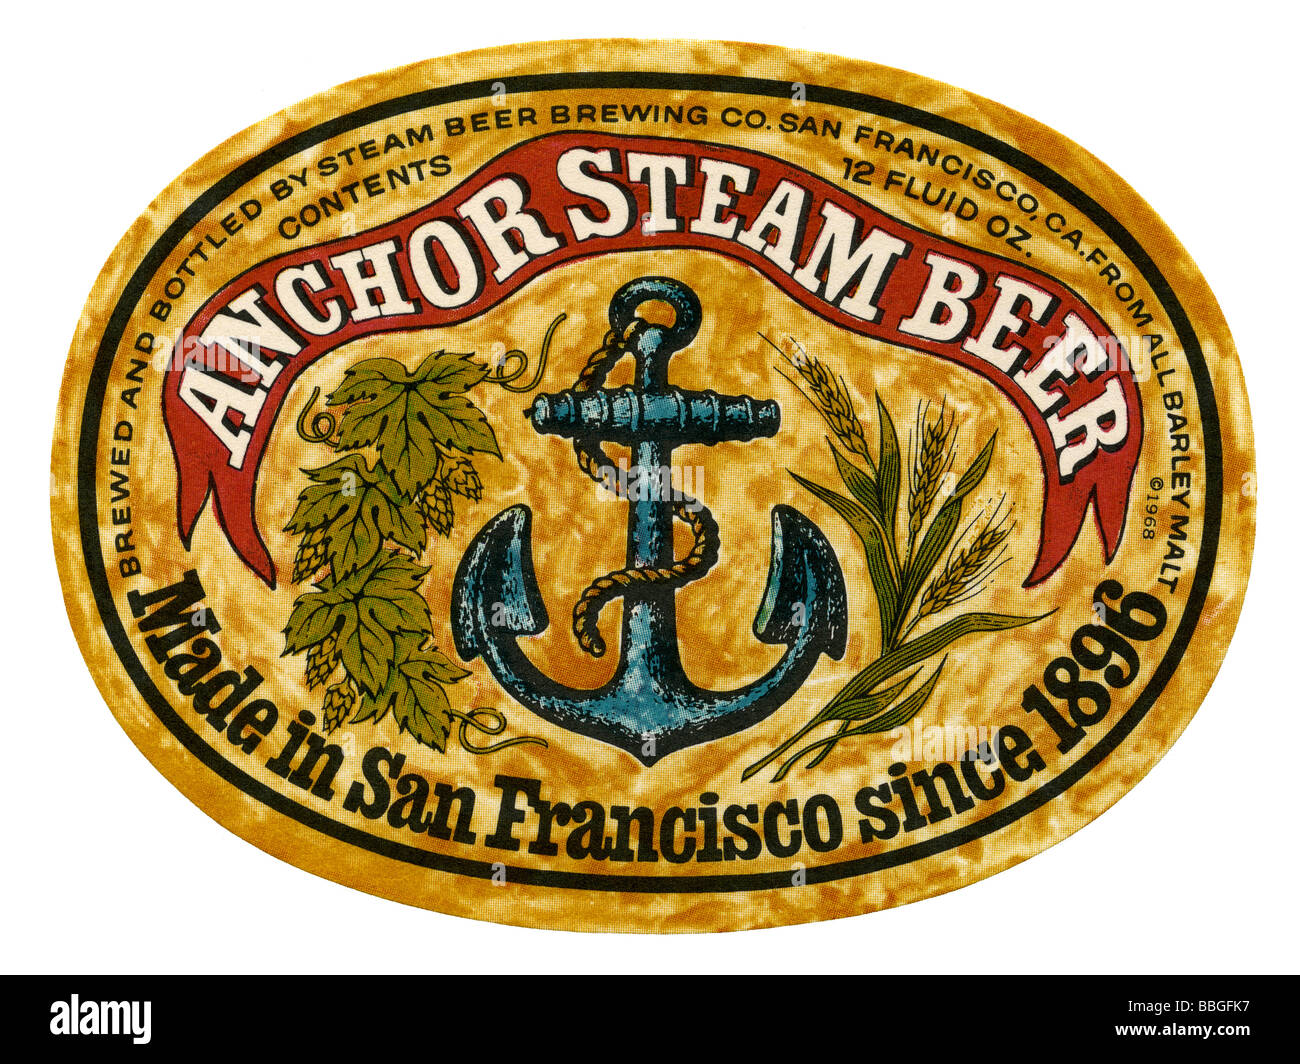 Old beer label for Anchor Steam Beer, San Francisco, California, USA Stock Photo